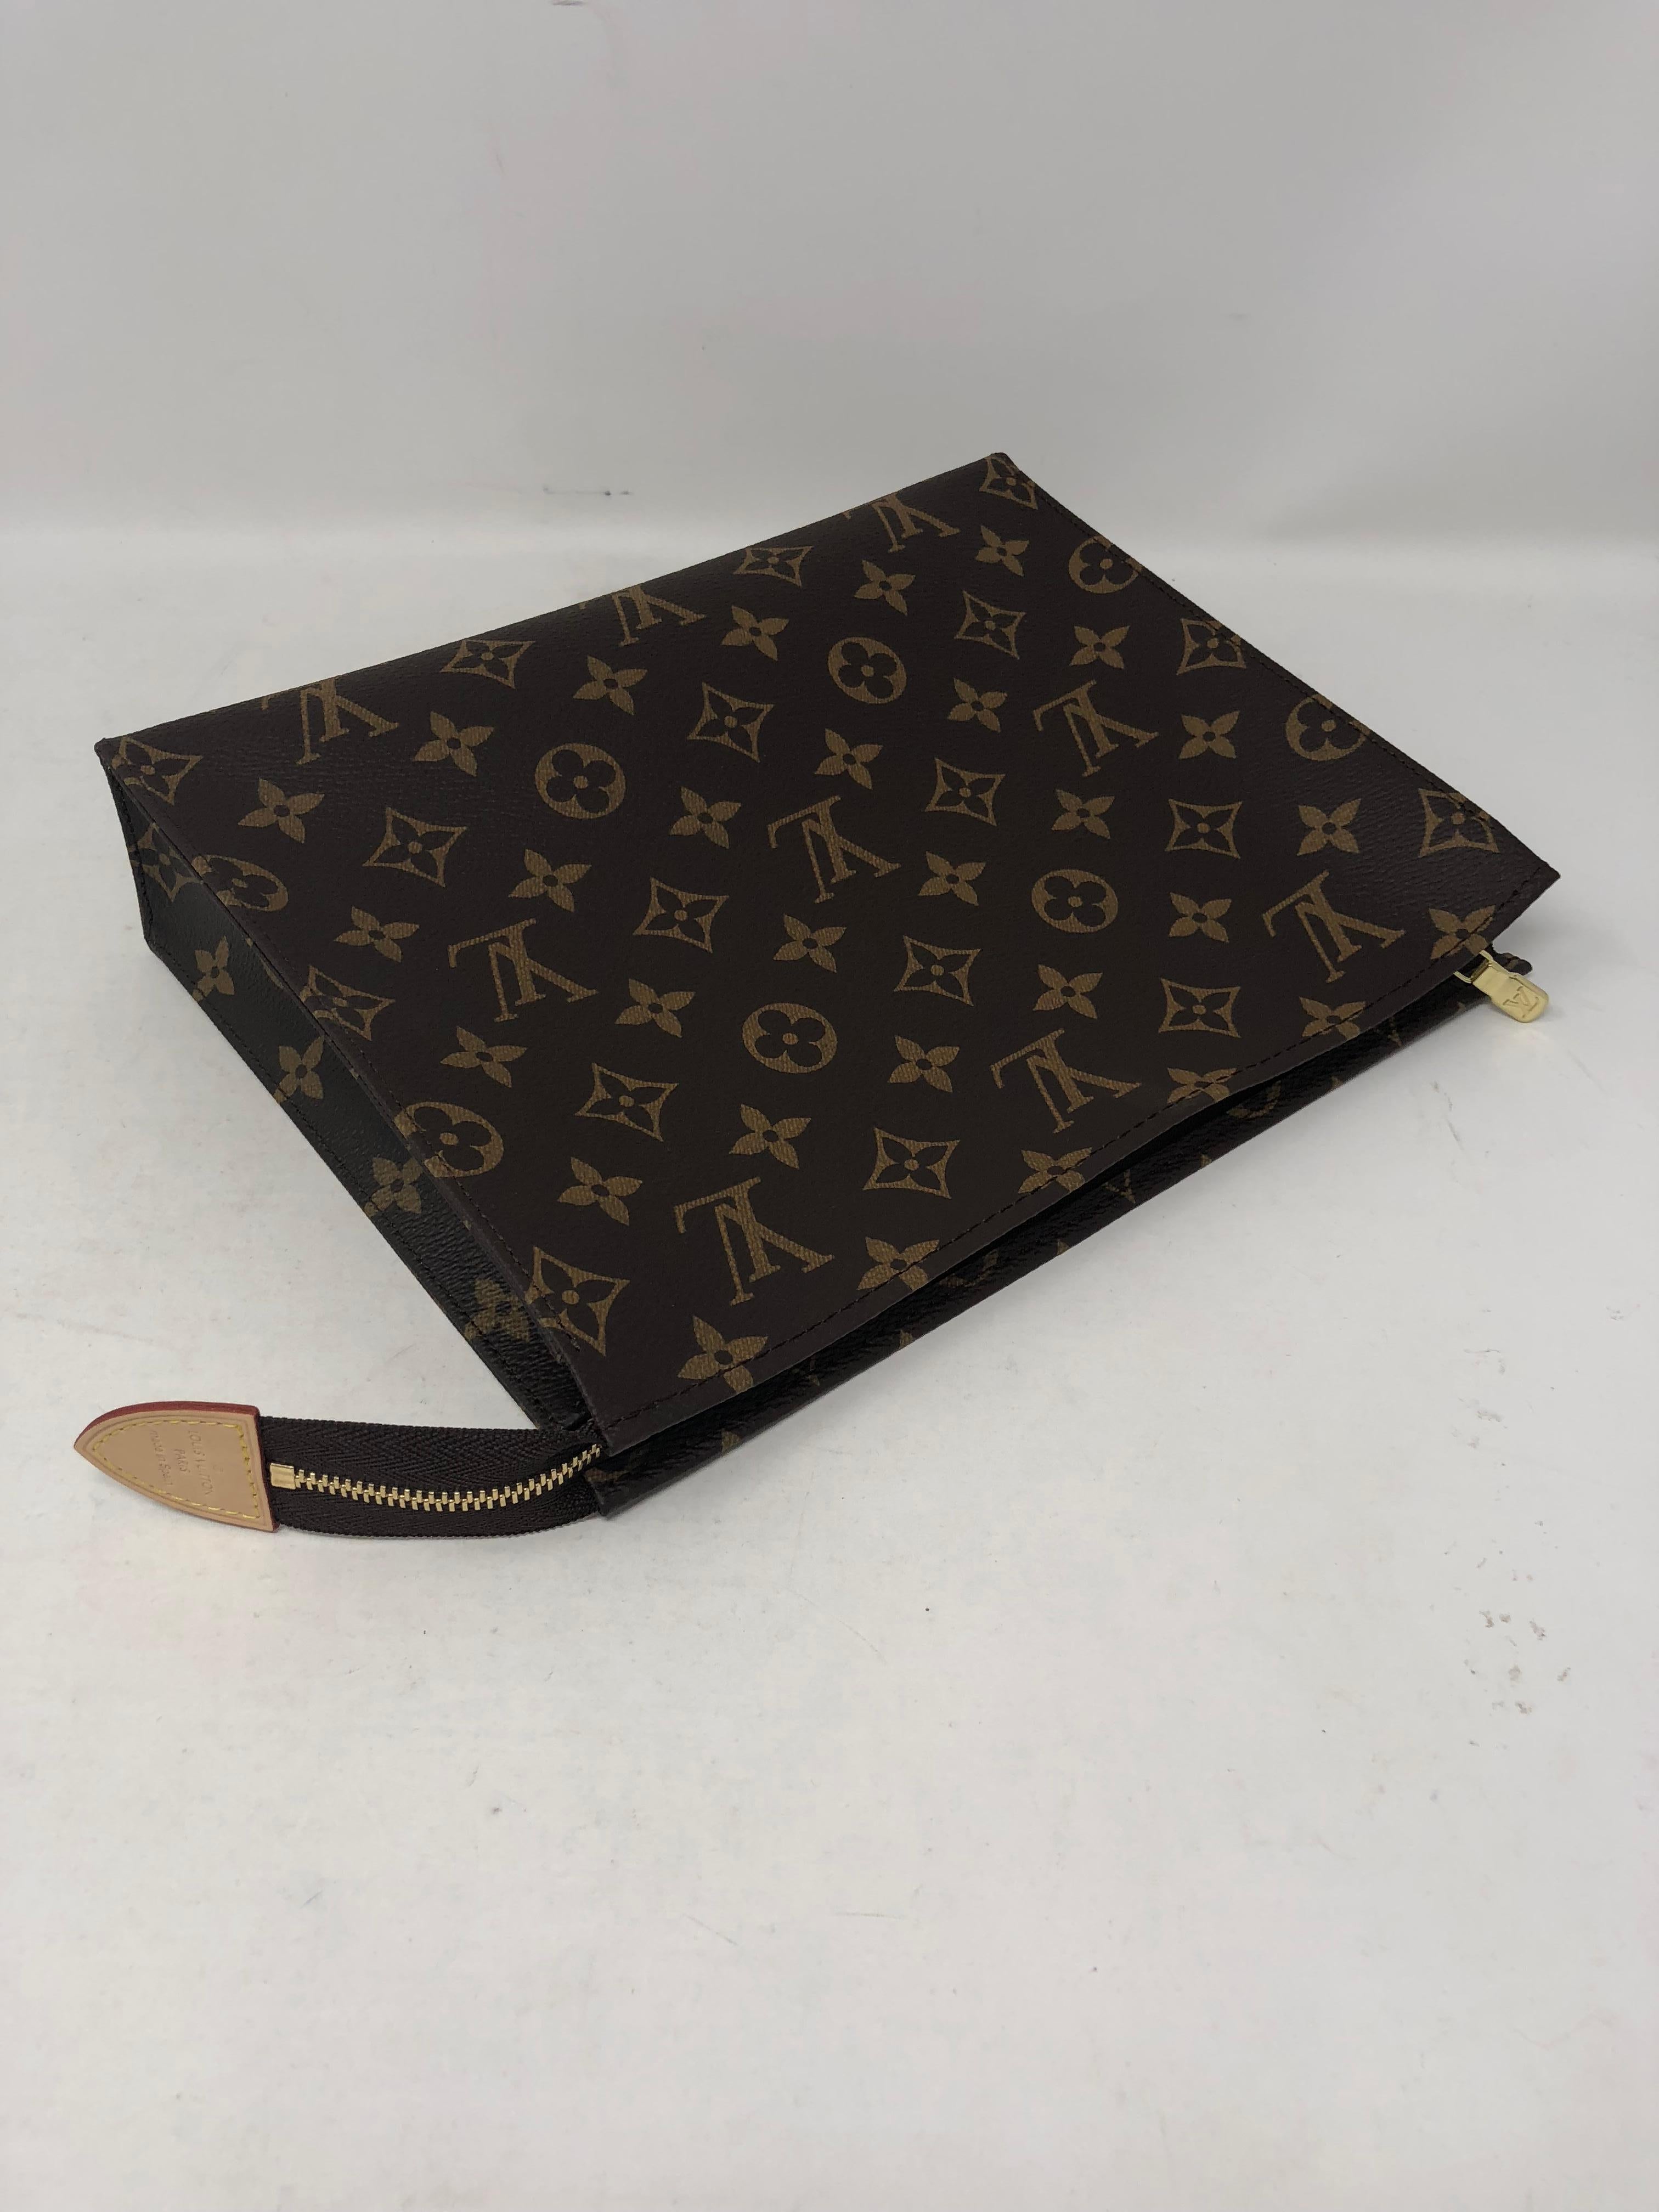 Louis Vuitton Toiletry Pouch 26 in monogram canvas. Brand new and sold out at LV. The largest size of the toiletry pouches. Makes a great clutch or insert for a large bag. The most wanted pouch. Comes with dust cover and box.  Guaranteed authentic. 